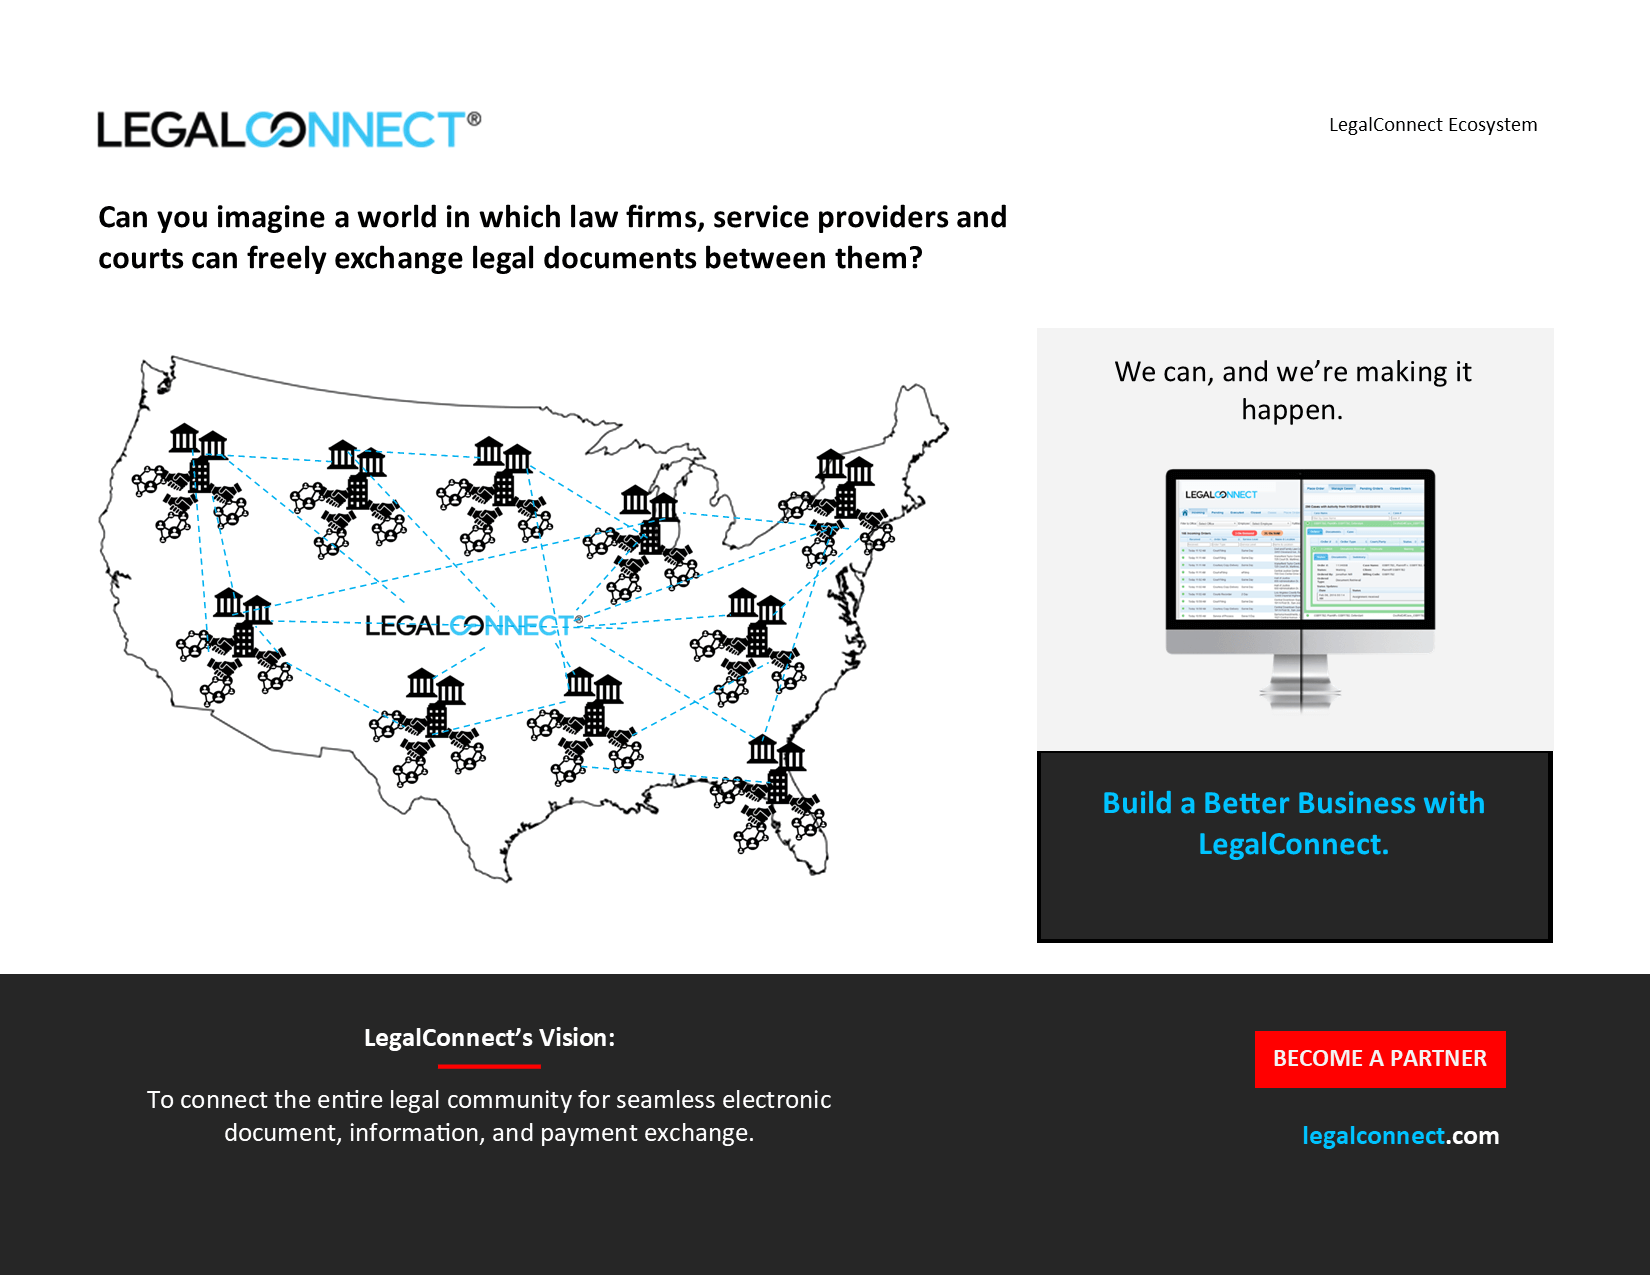 The LegalConnect Ecosystem